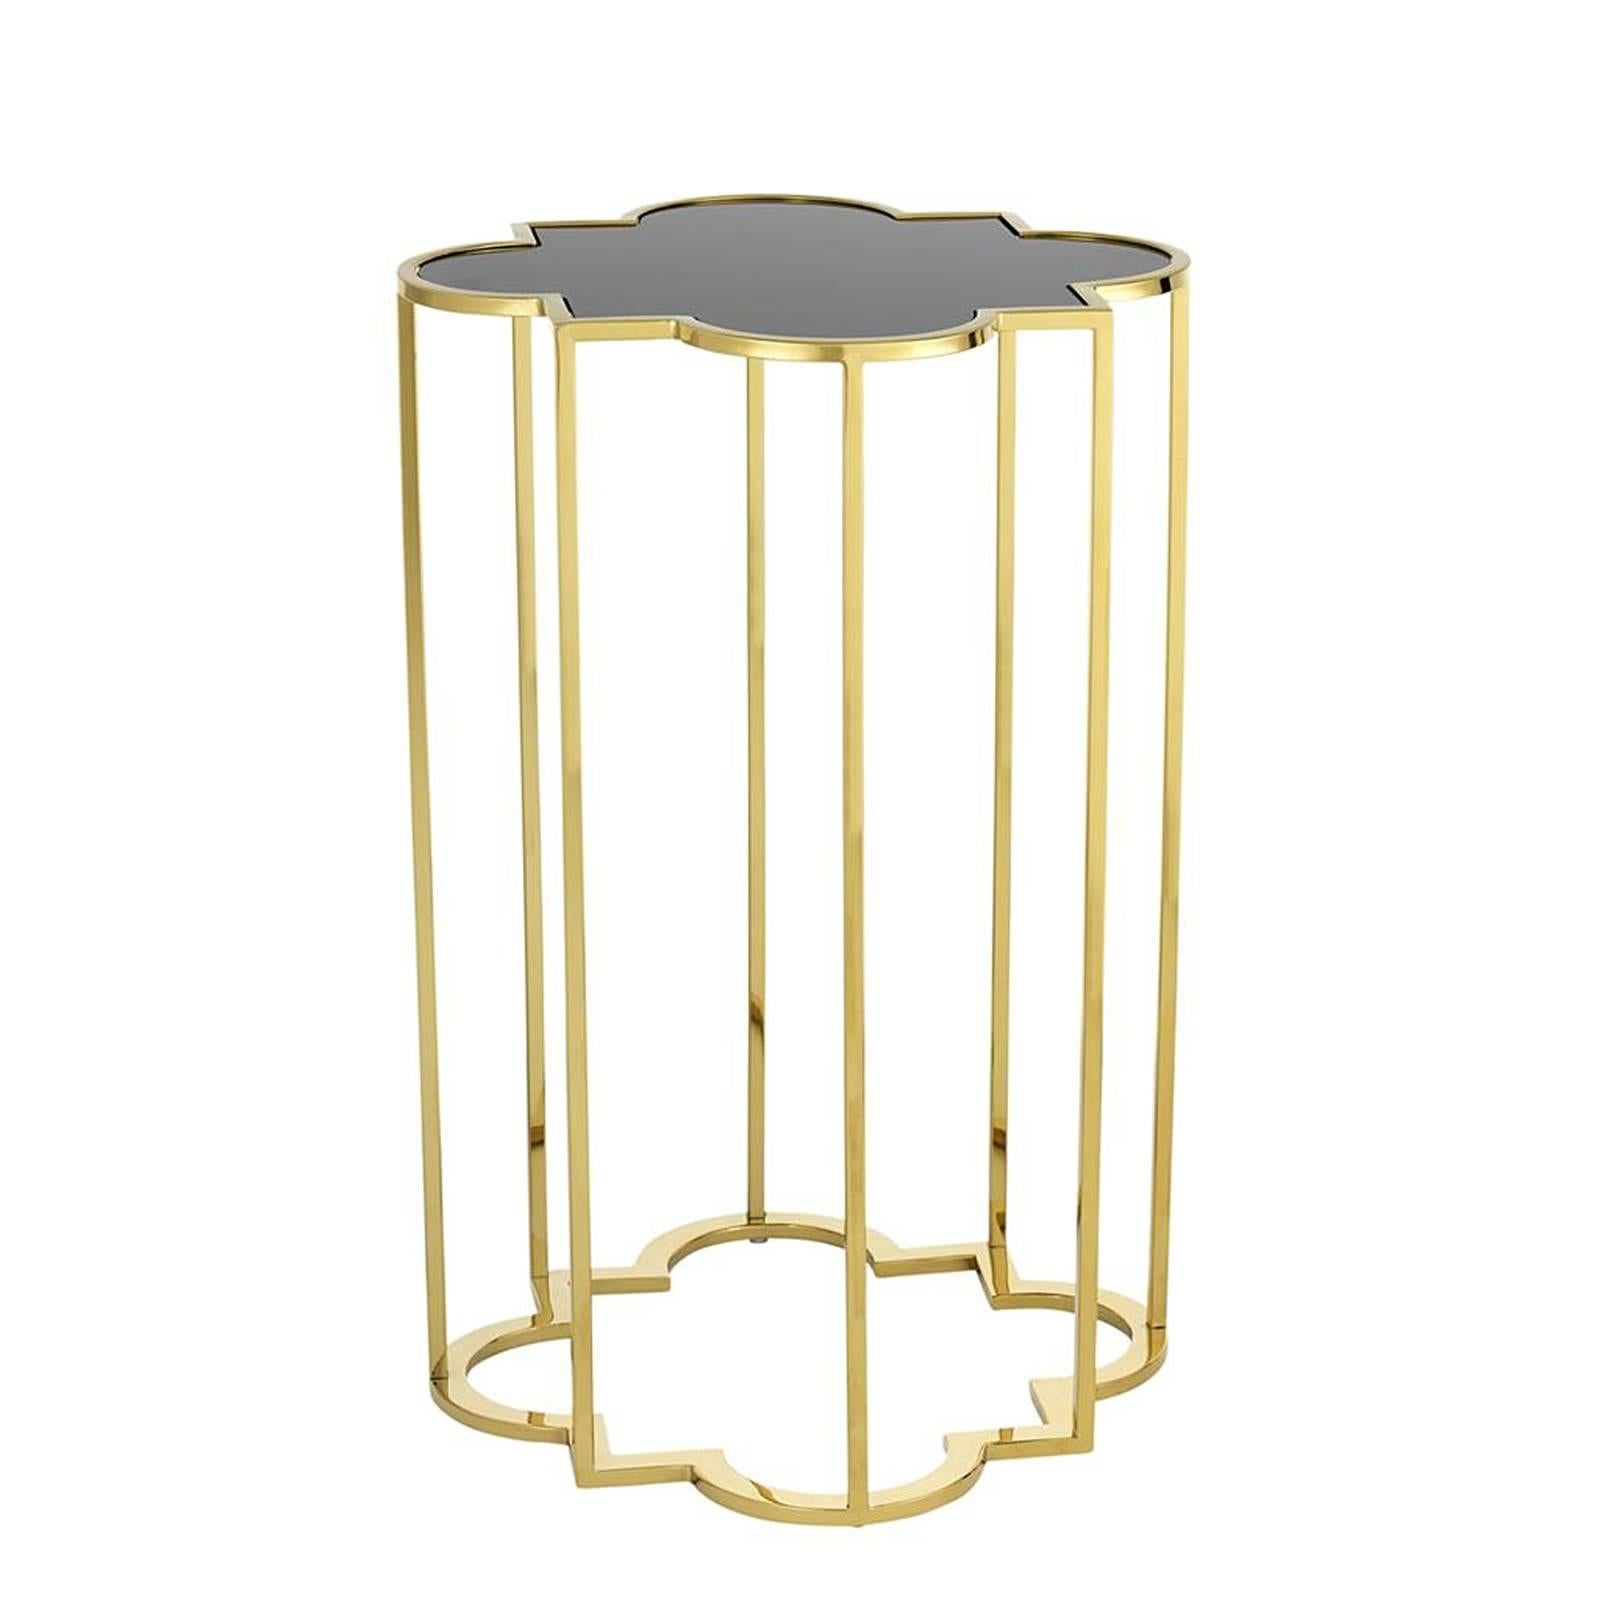 Side table clover set of two with structure in gold
finish. Tops in tempered smoked glass.
Measure: A/ L 40 x D 40 x H 60cm.
B/ L 30 x D 30 x H 55cm.
Also available with structure in polished stainless
steel finish with tops in tempered smoked